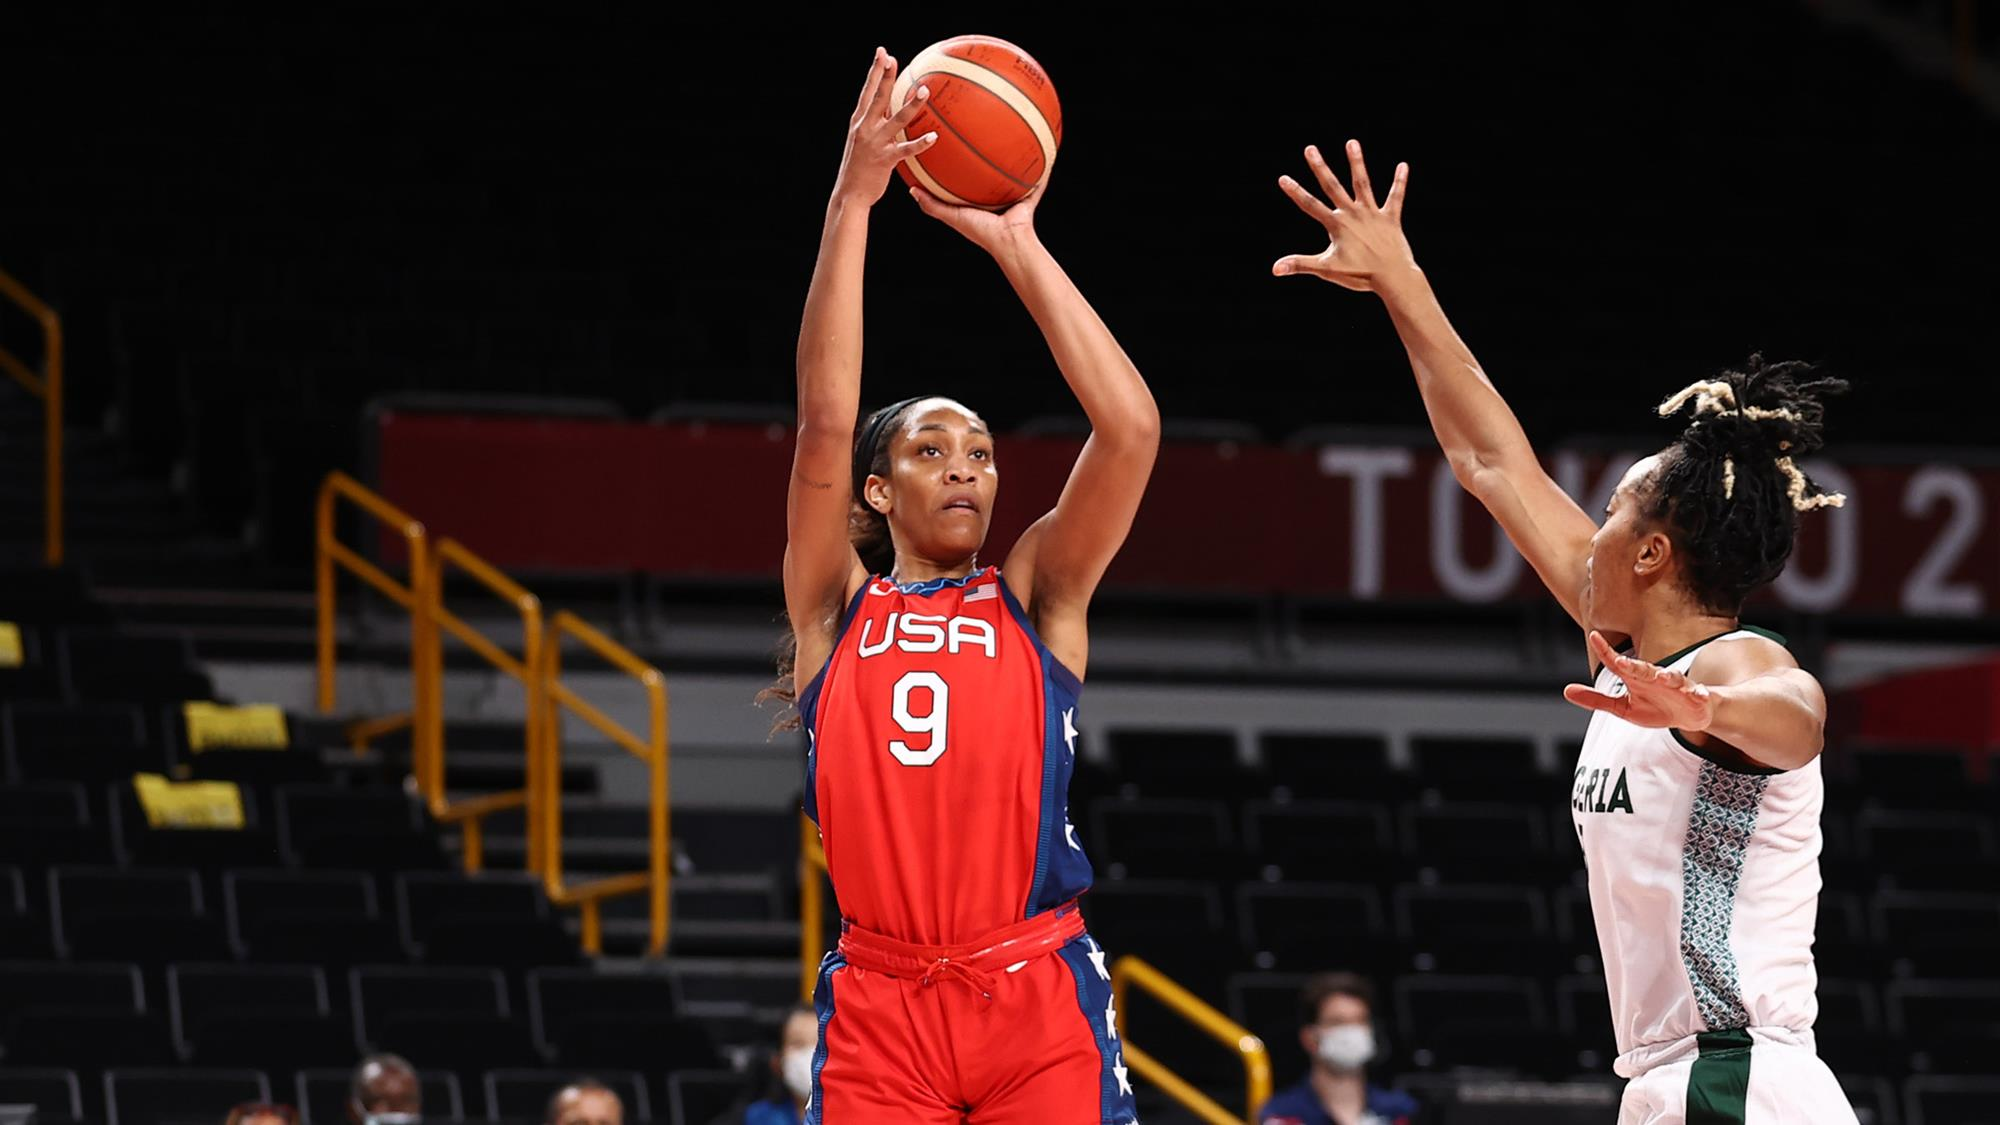 Wilson Delivers Double-Double in Olympic Debut